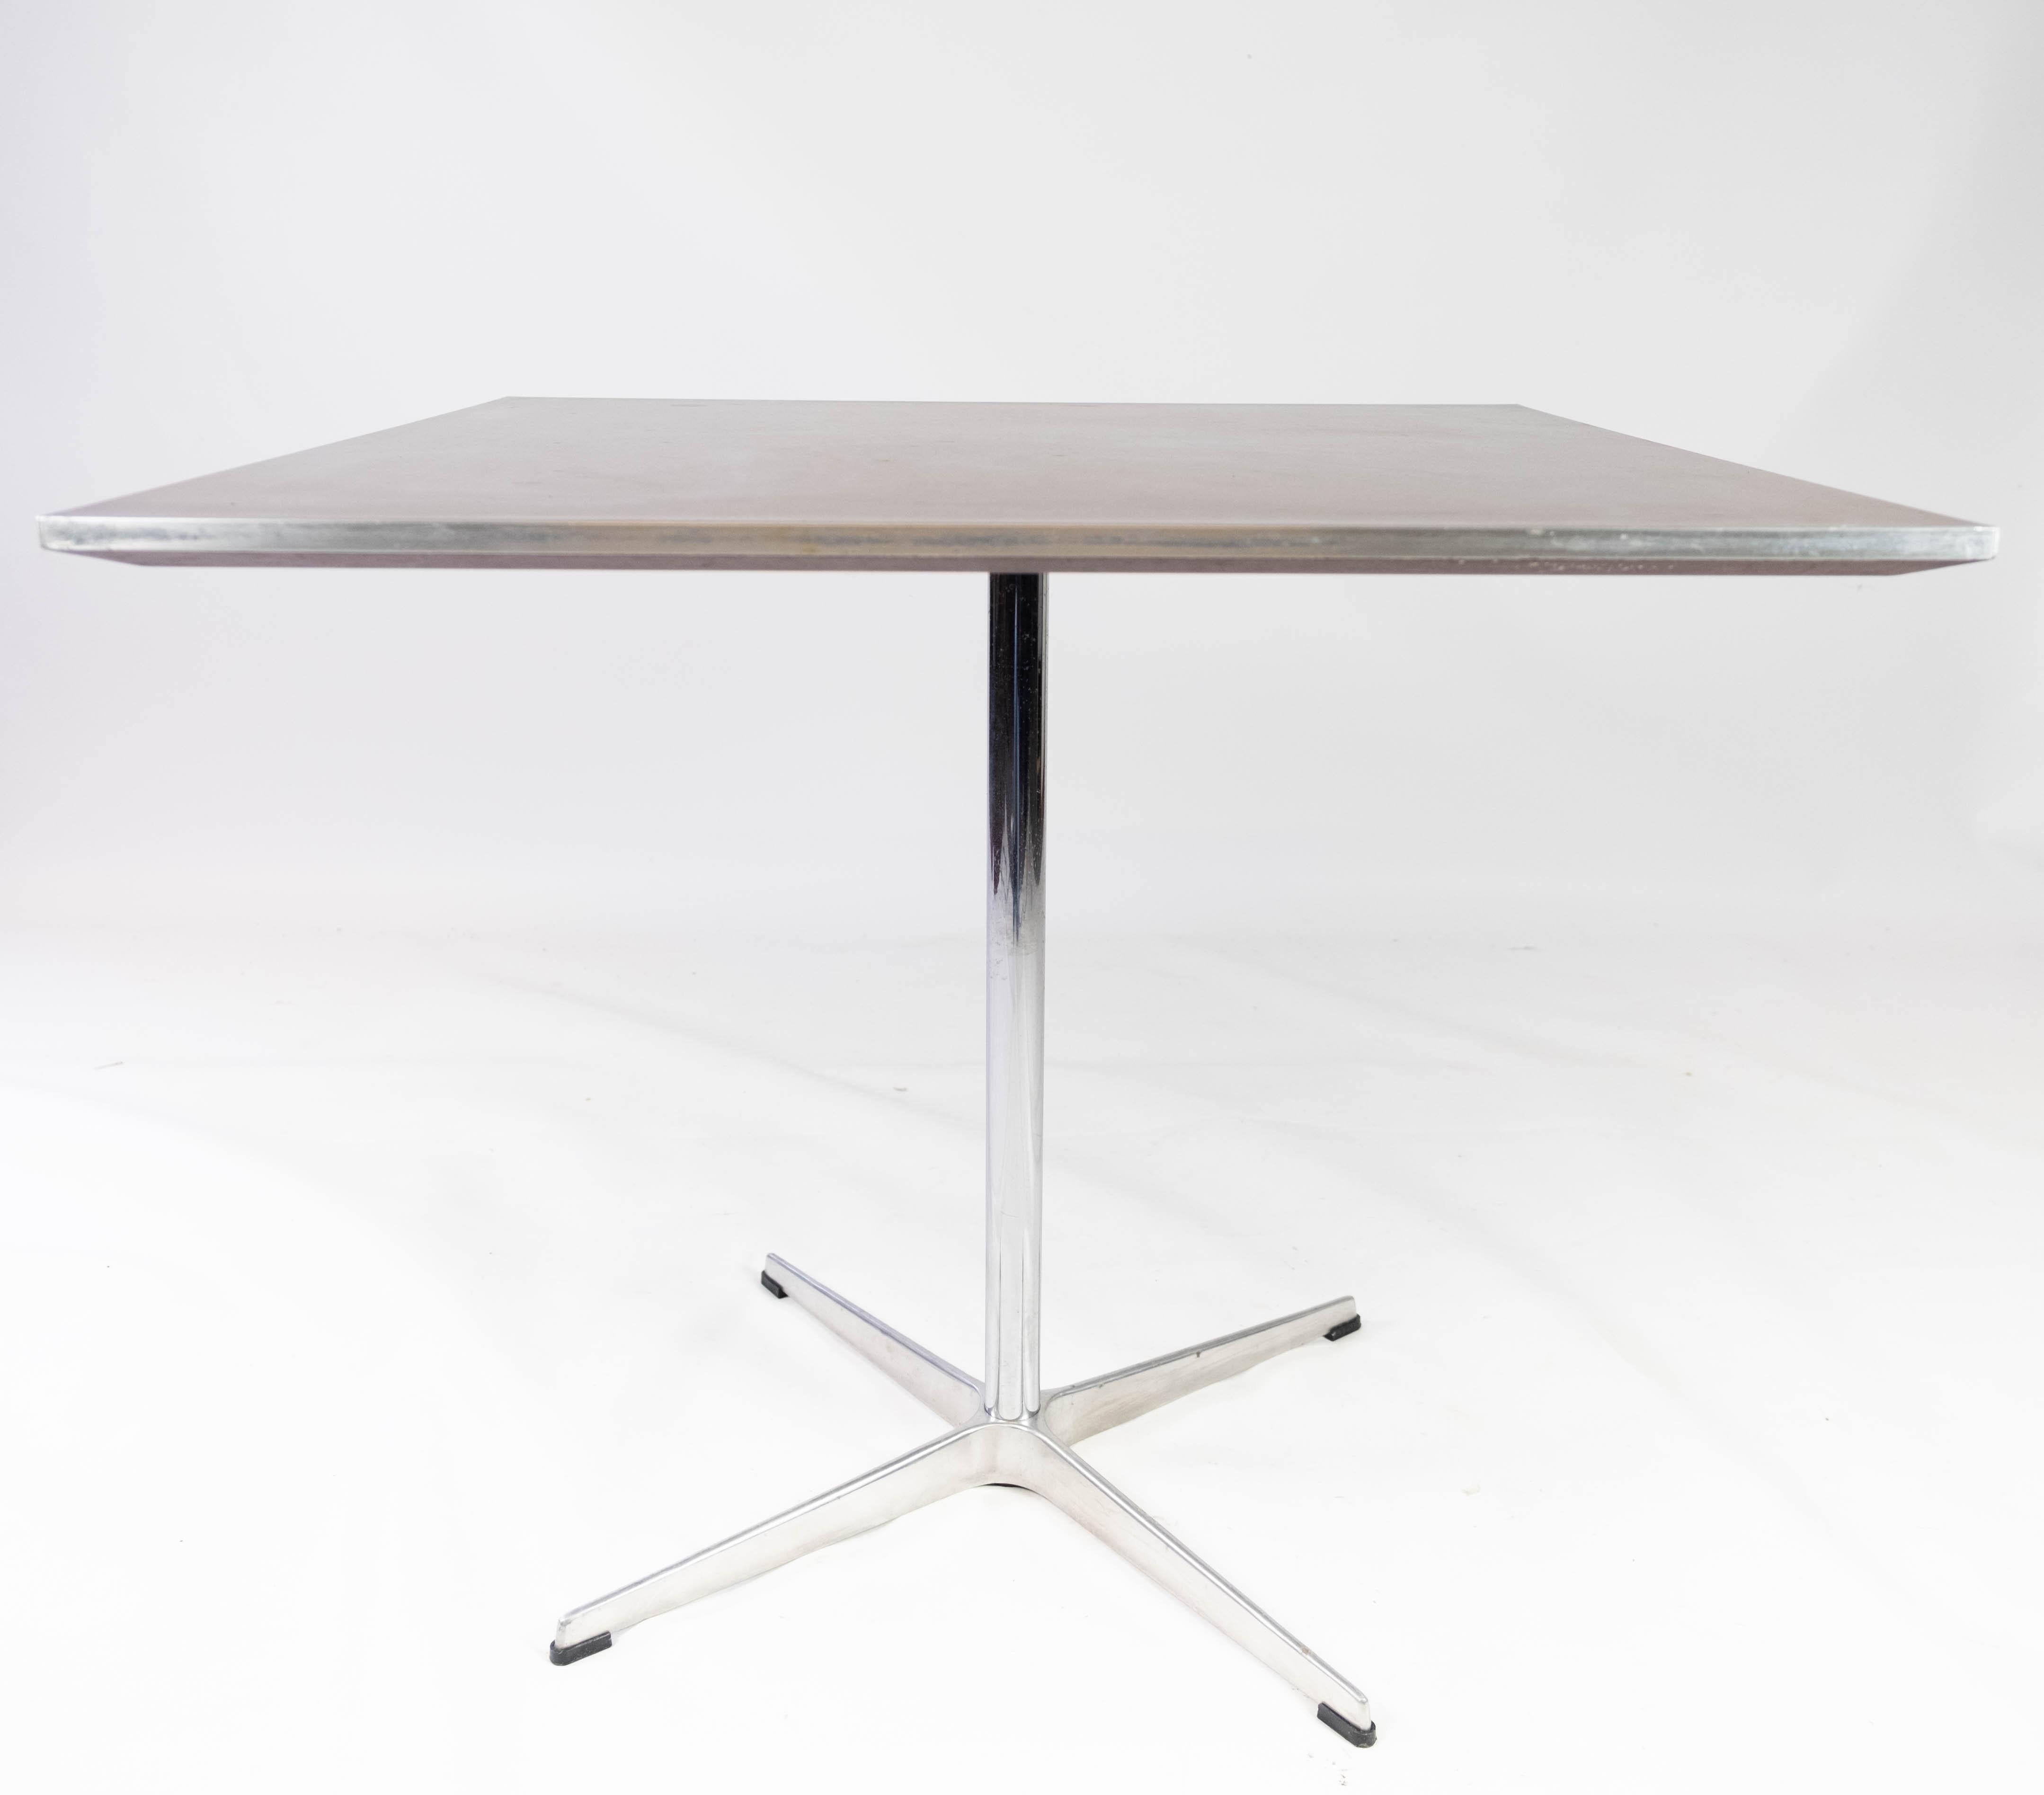 Scandinavian Modern Dining Table of Metal and Laminate Designed by Arne Jacobsen